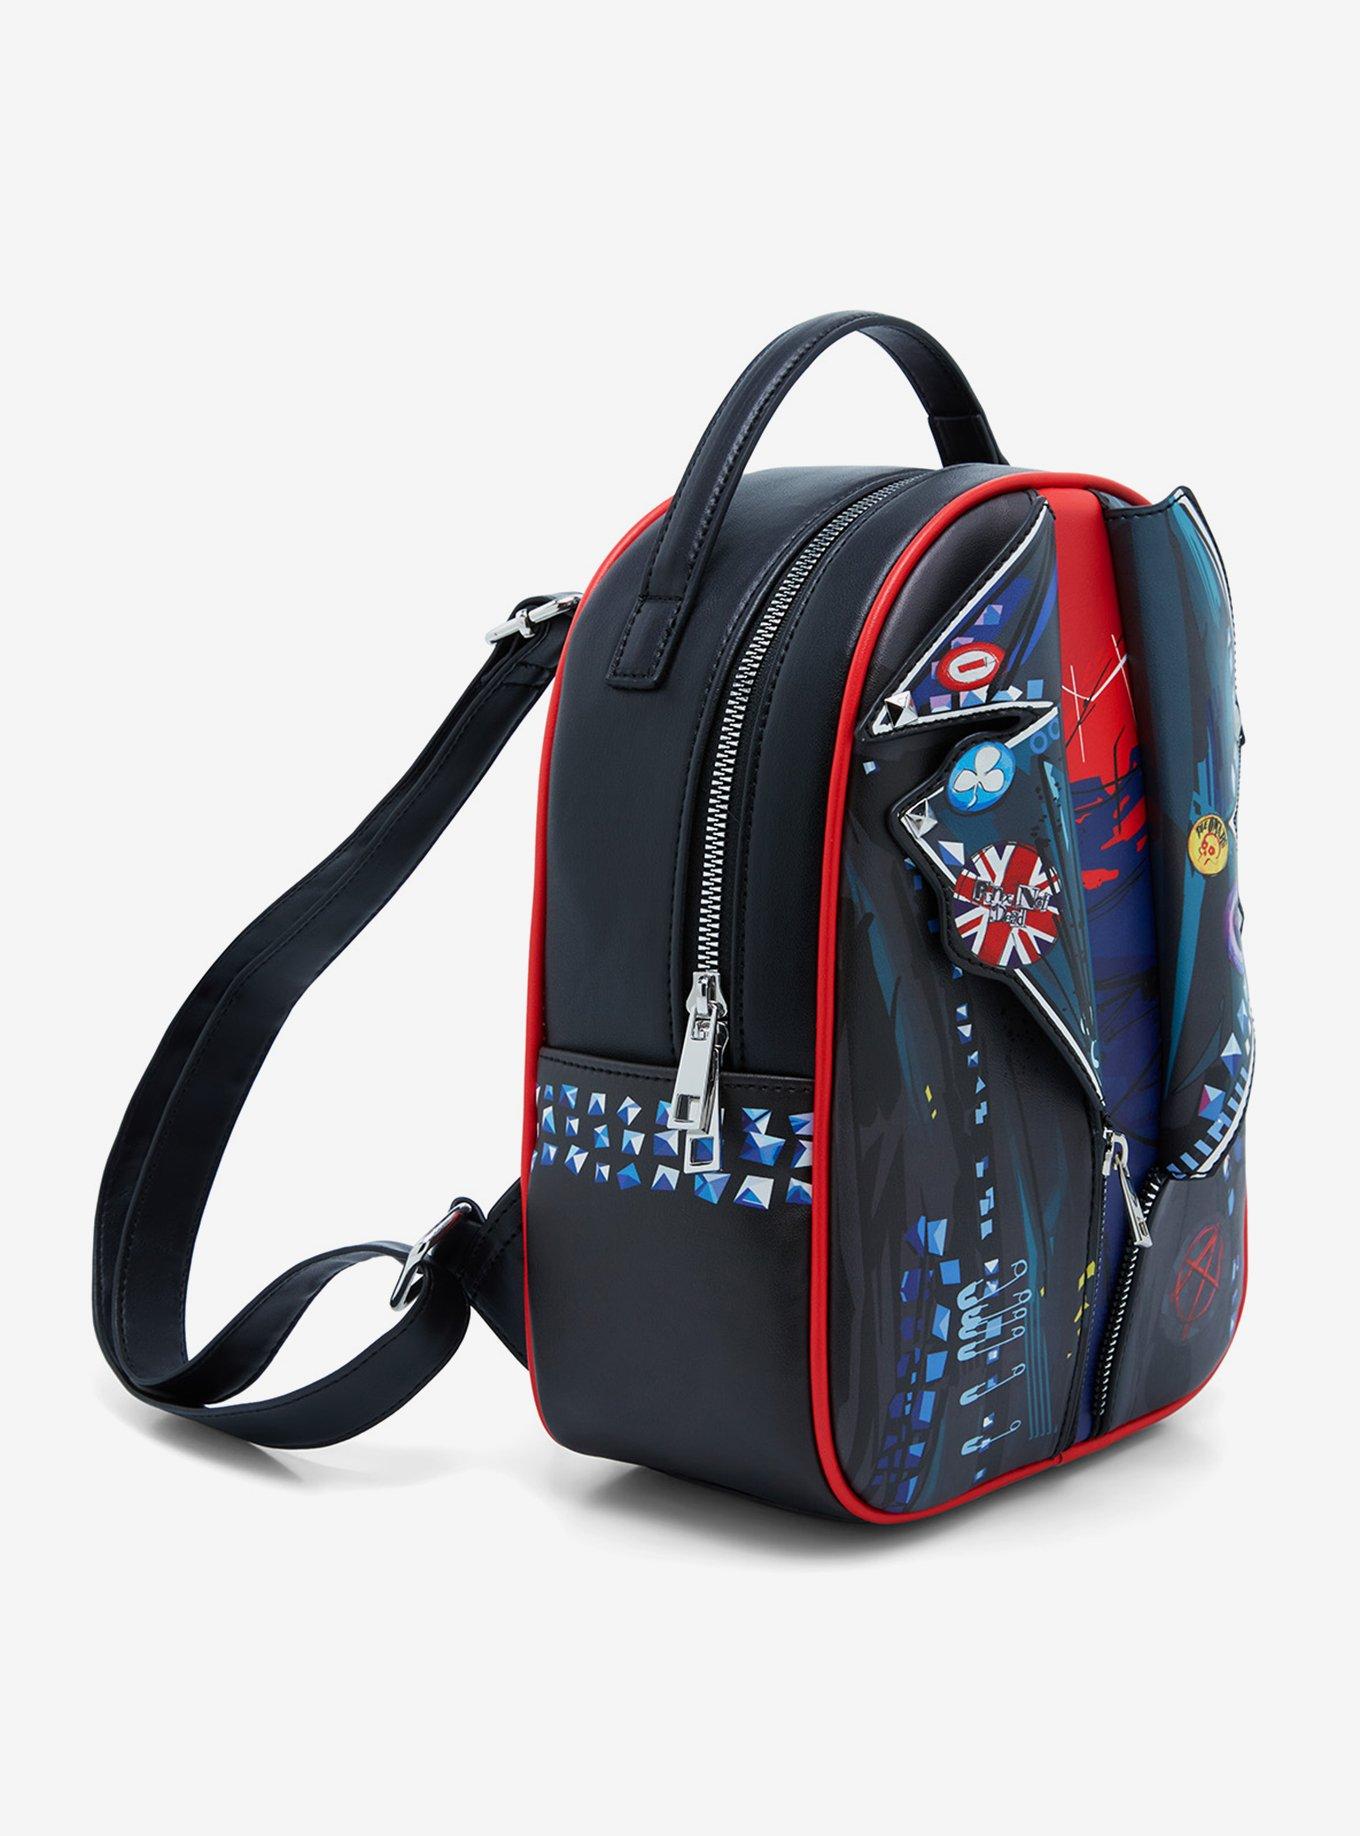 Spider-Man - Across The Spider-Verse 10 inch Faux Leather Mini Backpack